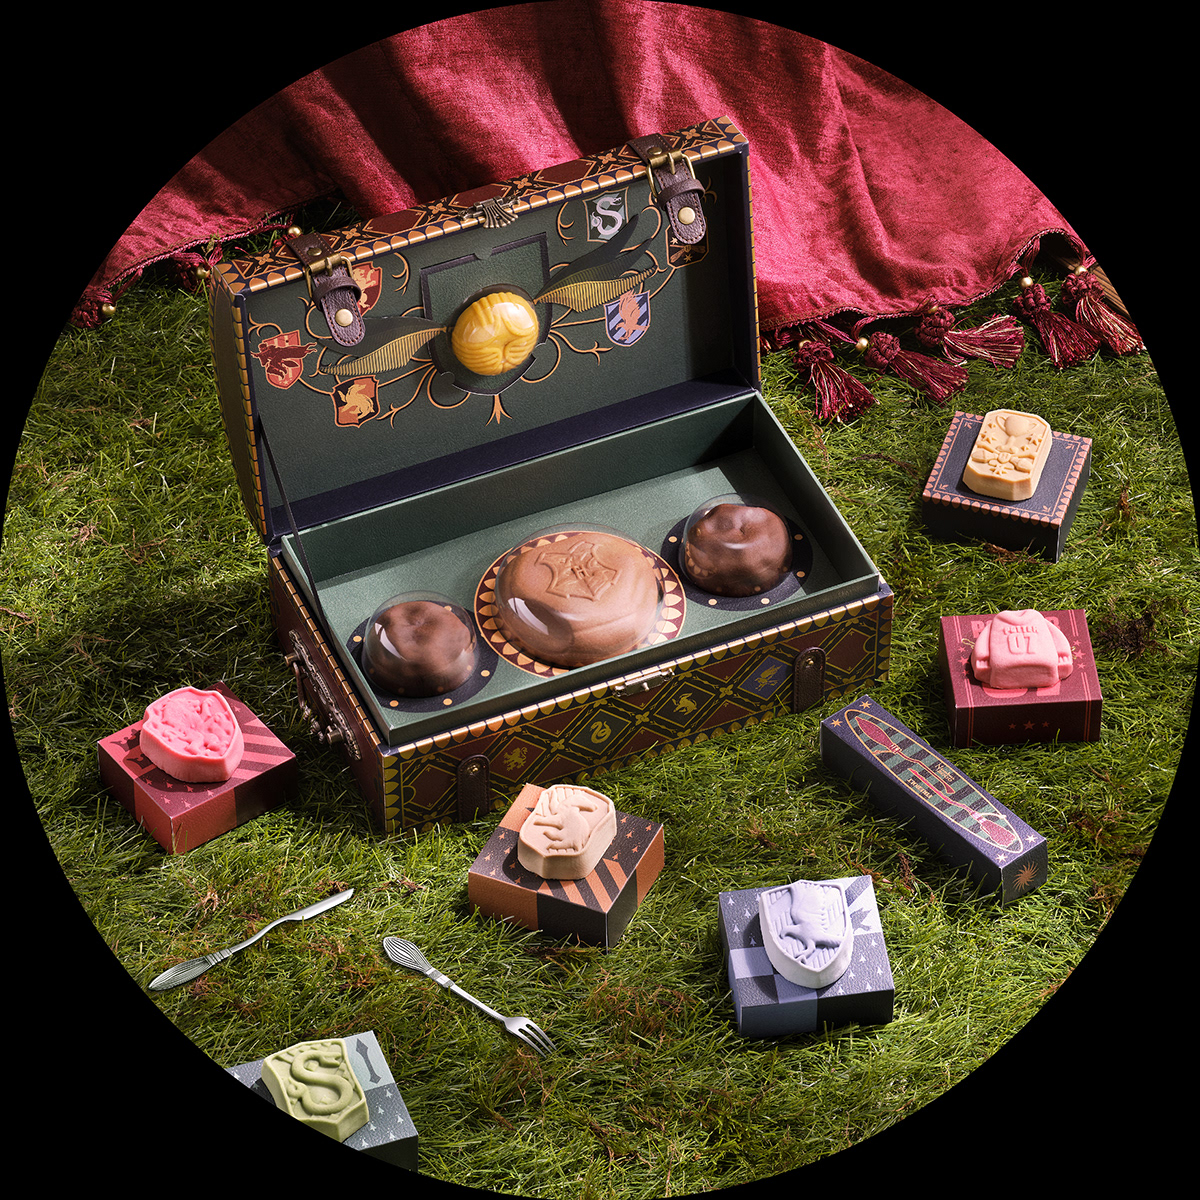 harry potter Hogwarts Magic   Collaboration pastry mooncake gift box Packaging sports quidditch